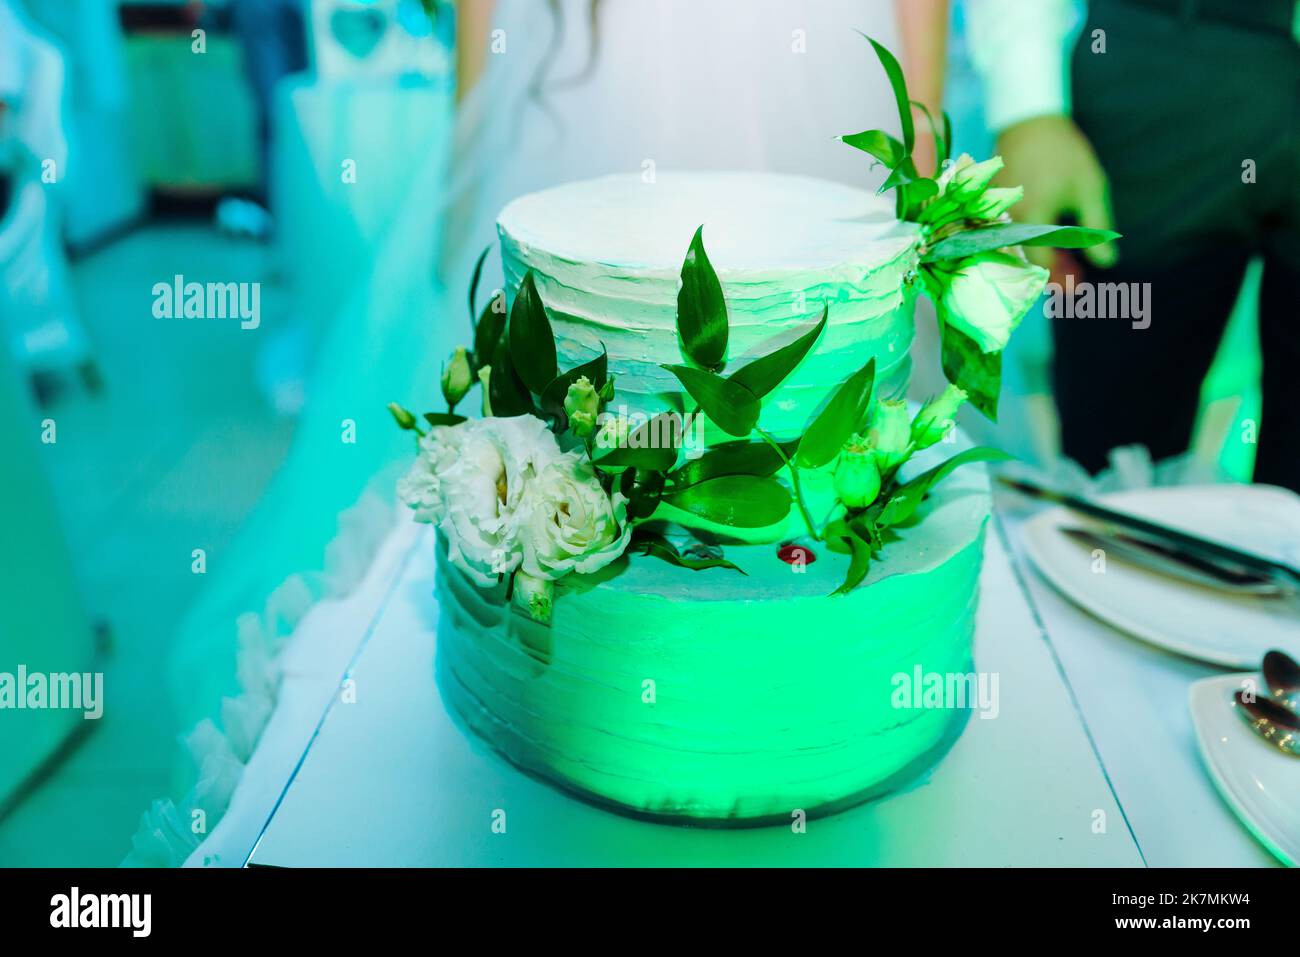 White wedding cake decorated by flowers standing on festive table with lots of snacks on side. Violet flowers on foreground. Wedding. Recetion Stock Photo